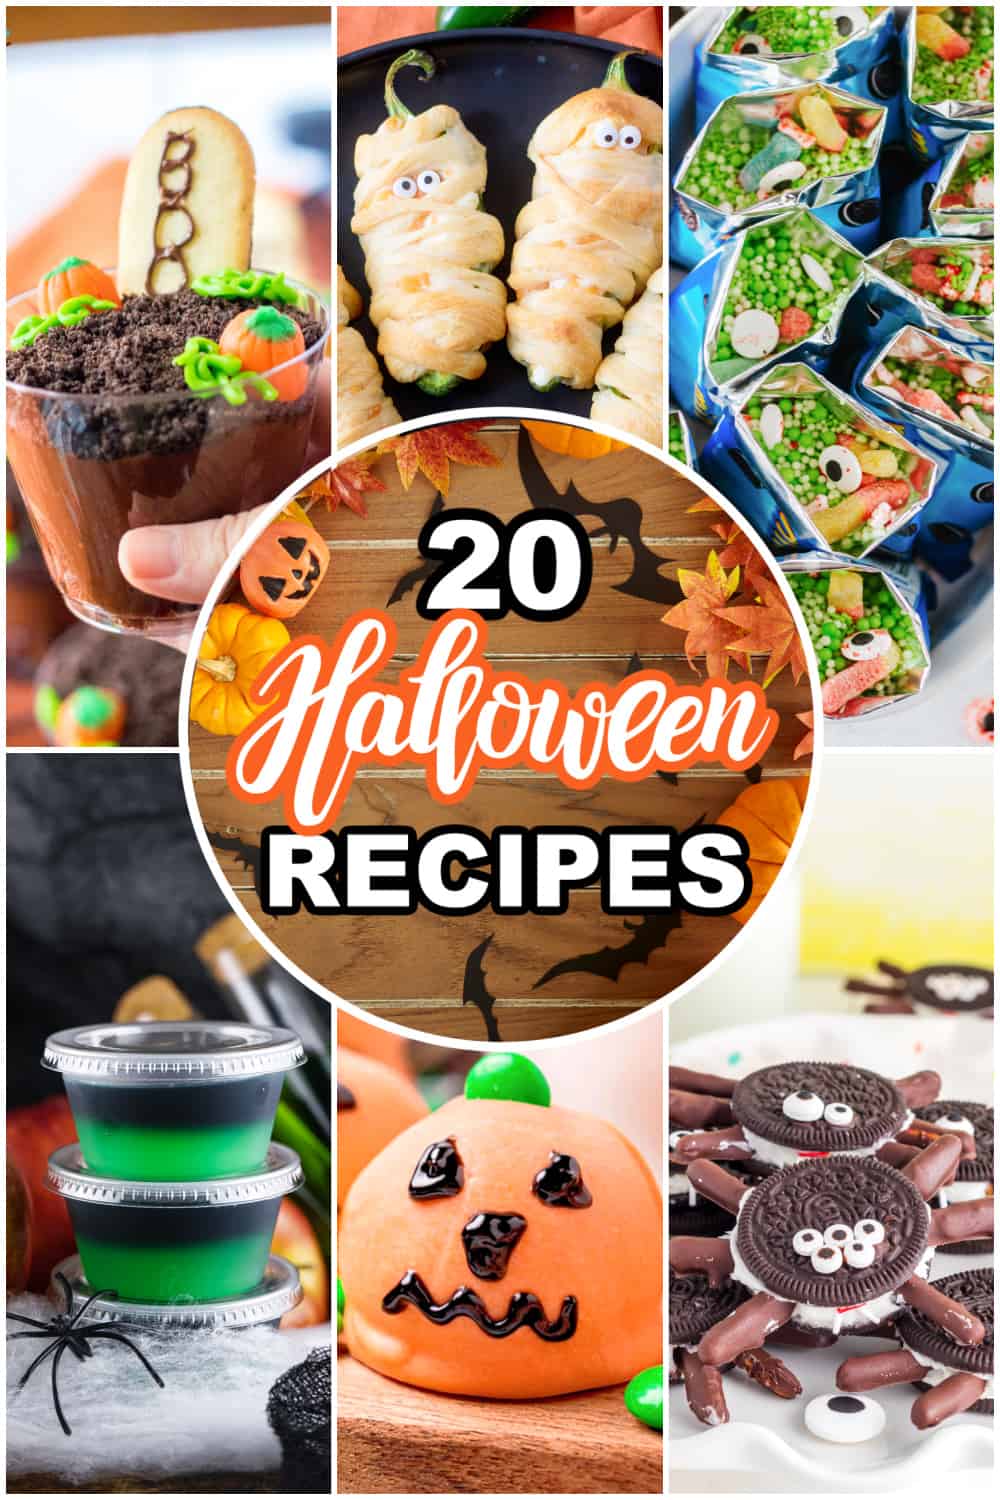 A collage of 6 photos with text on the collage that says "20 Halloween Recipes".